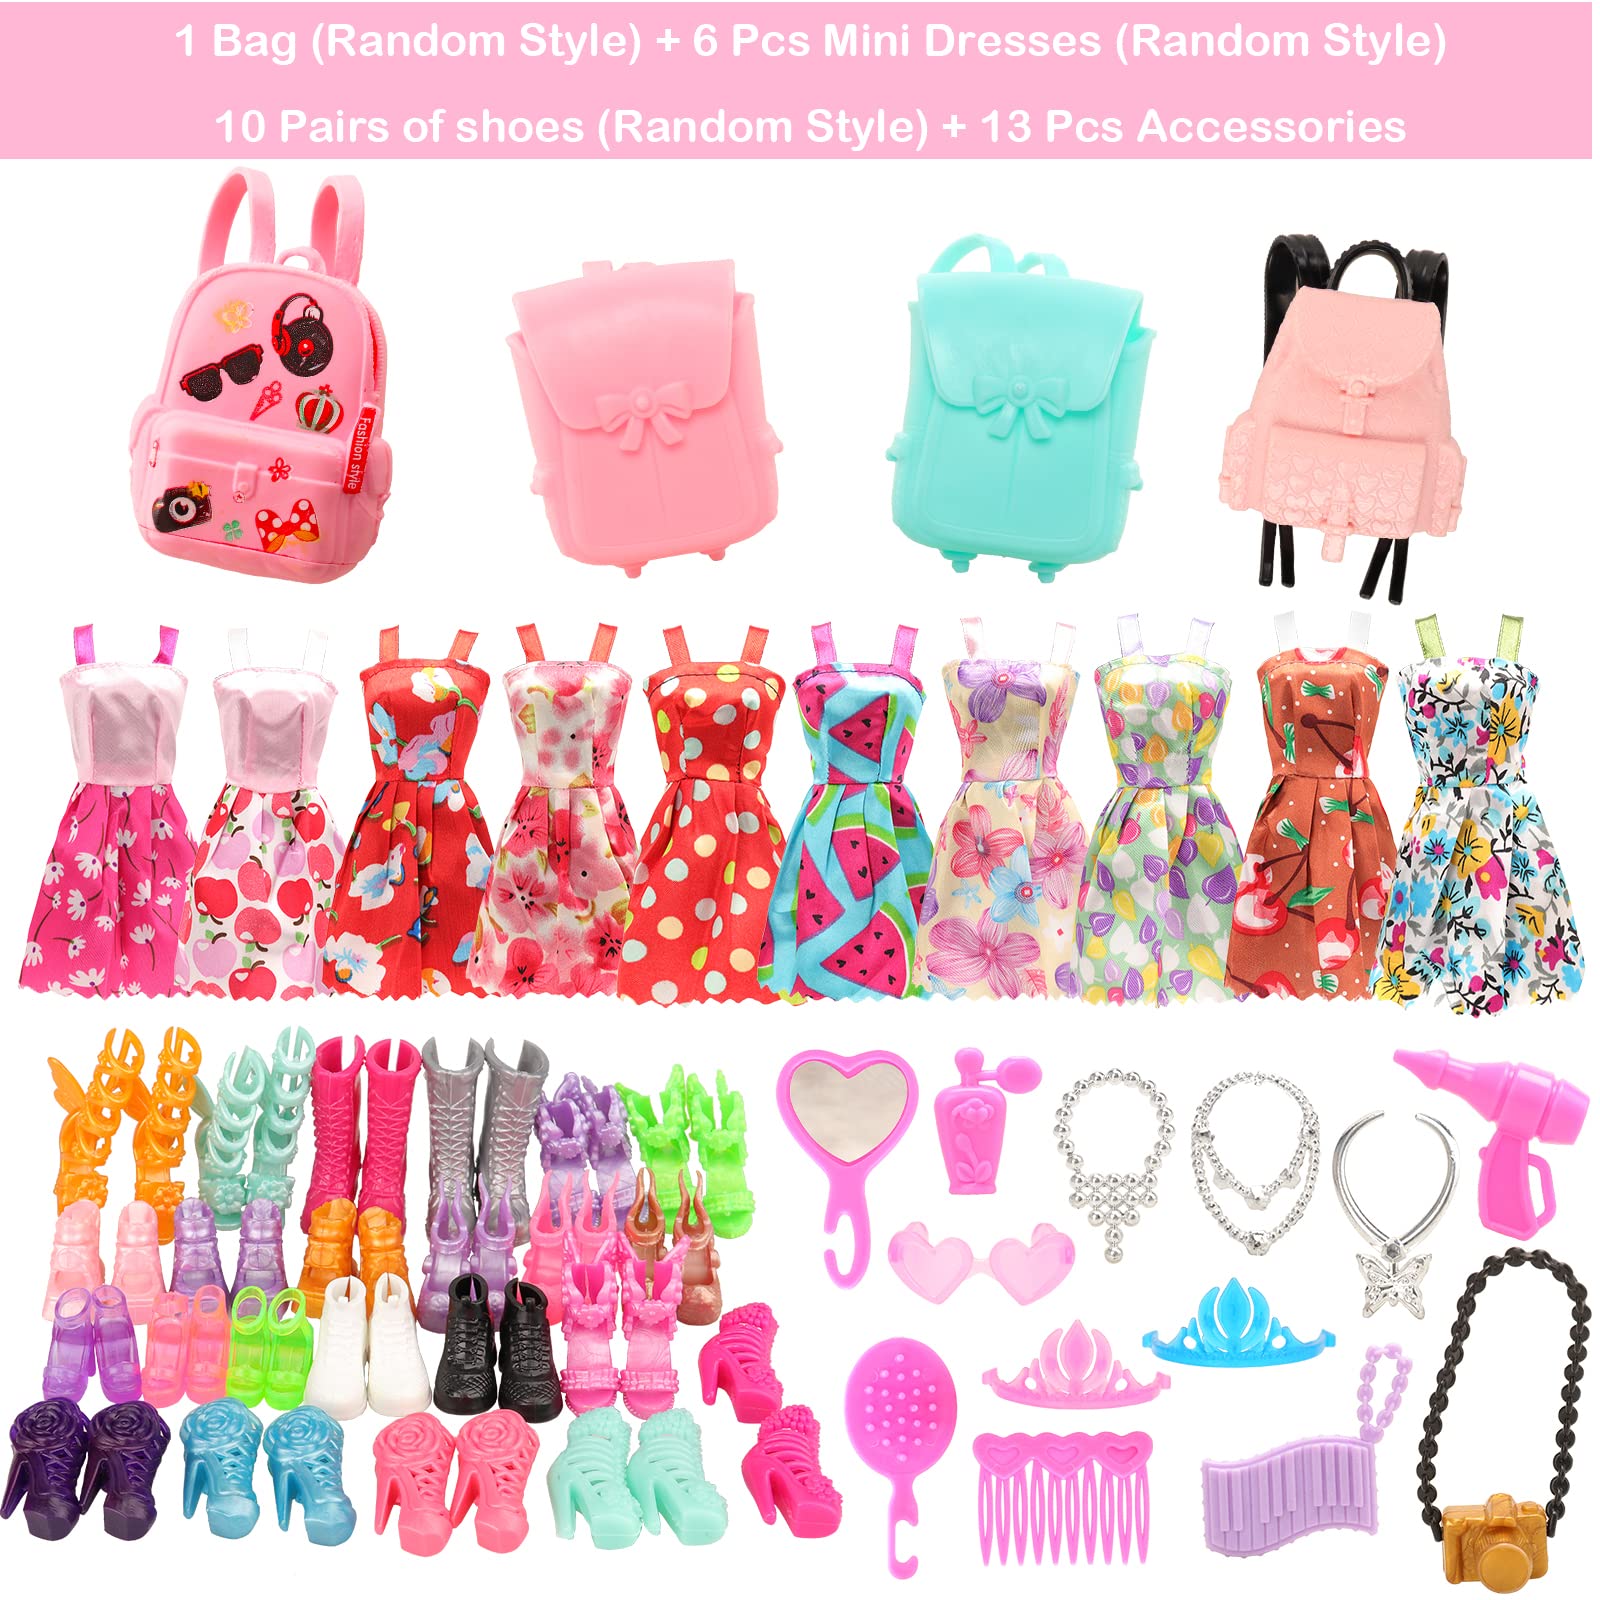 Barwa Lot 36 Items 3 Sets Fashion Dresses 3 Set Casual Tops and Pants 6 Pcs Mini Dresses with 1 Bags 10 Shoes, 13 Accessories for 11.5 Inch Girl Doll Birthday Xmas